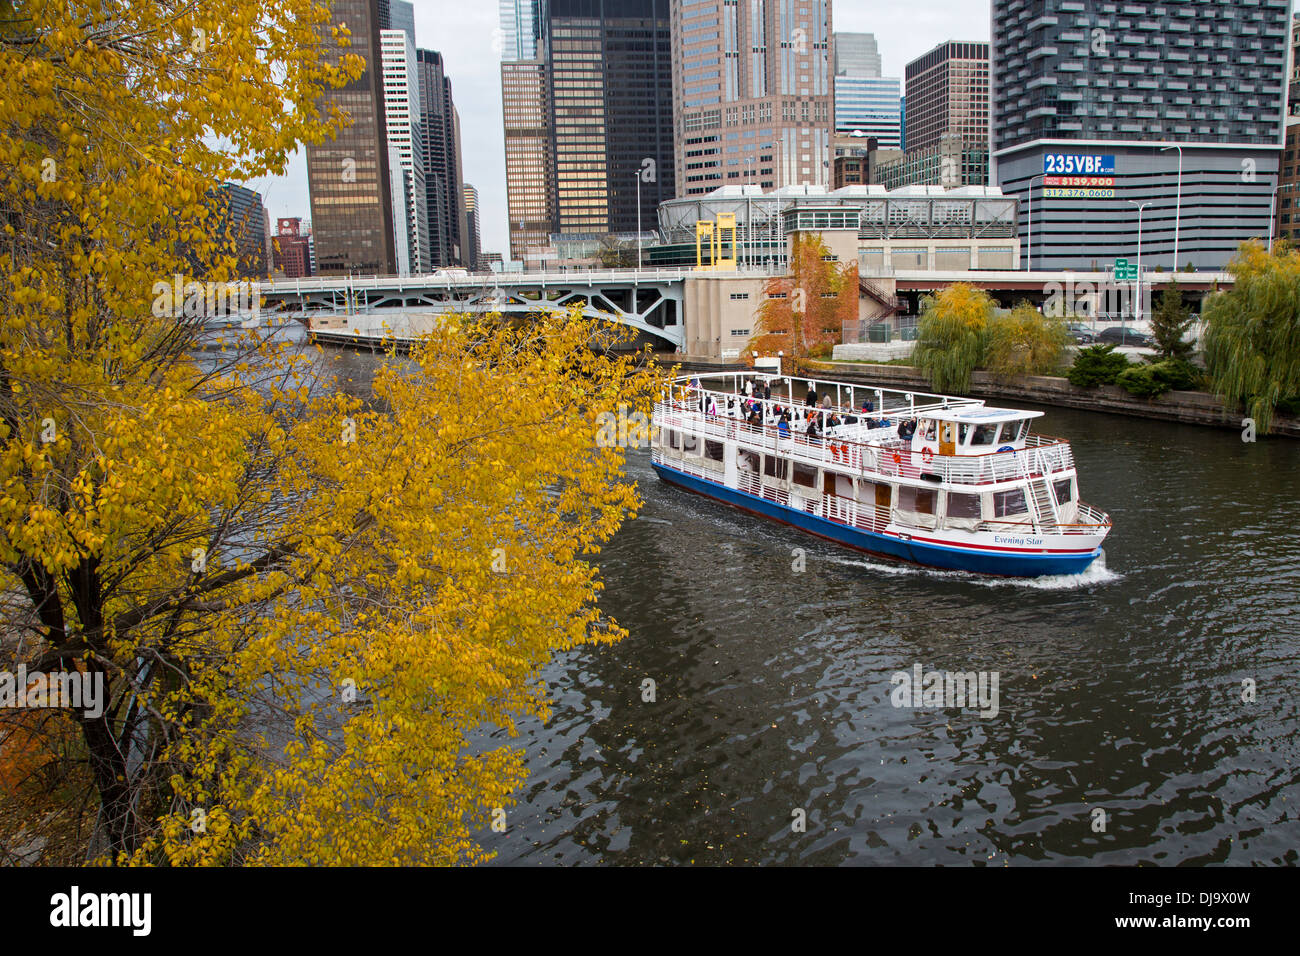 Chicago, Illinois - A sightseeing boat on the Chicago River. Stock Photo